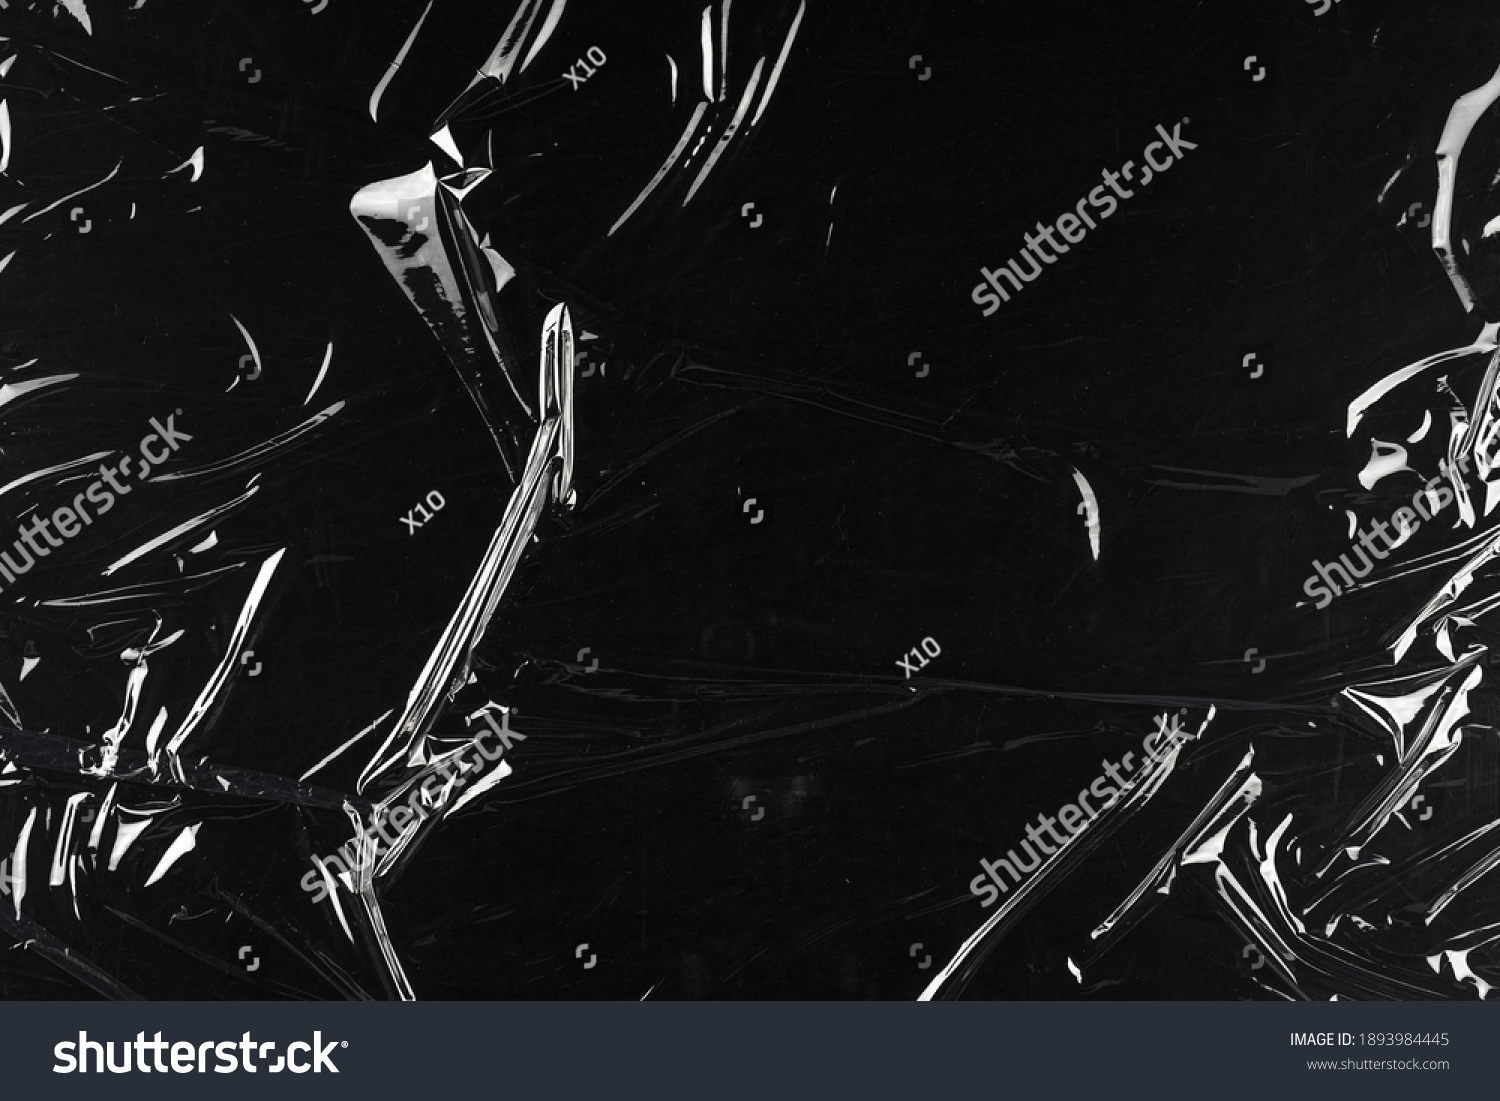 Transparent plastic wrap on the black background. Clean blank texture overlay effect template. Isolated wrinkle surface branding mock-up. #1893984445